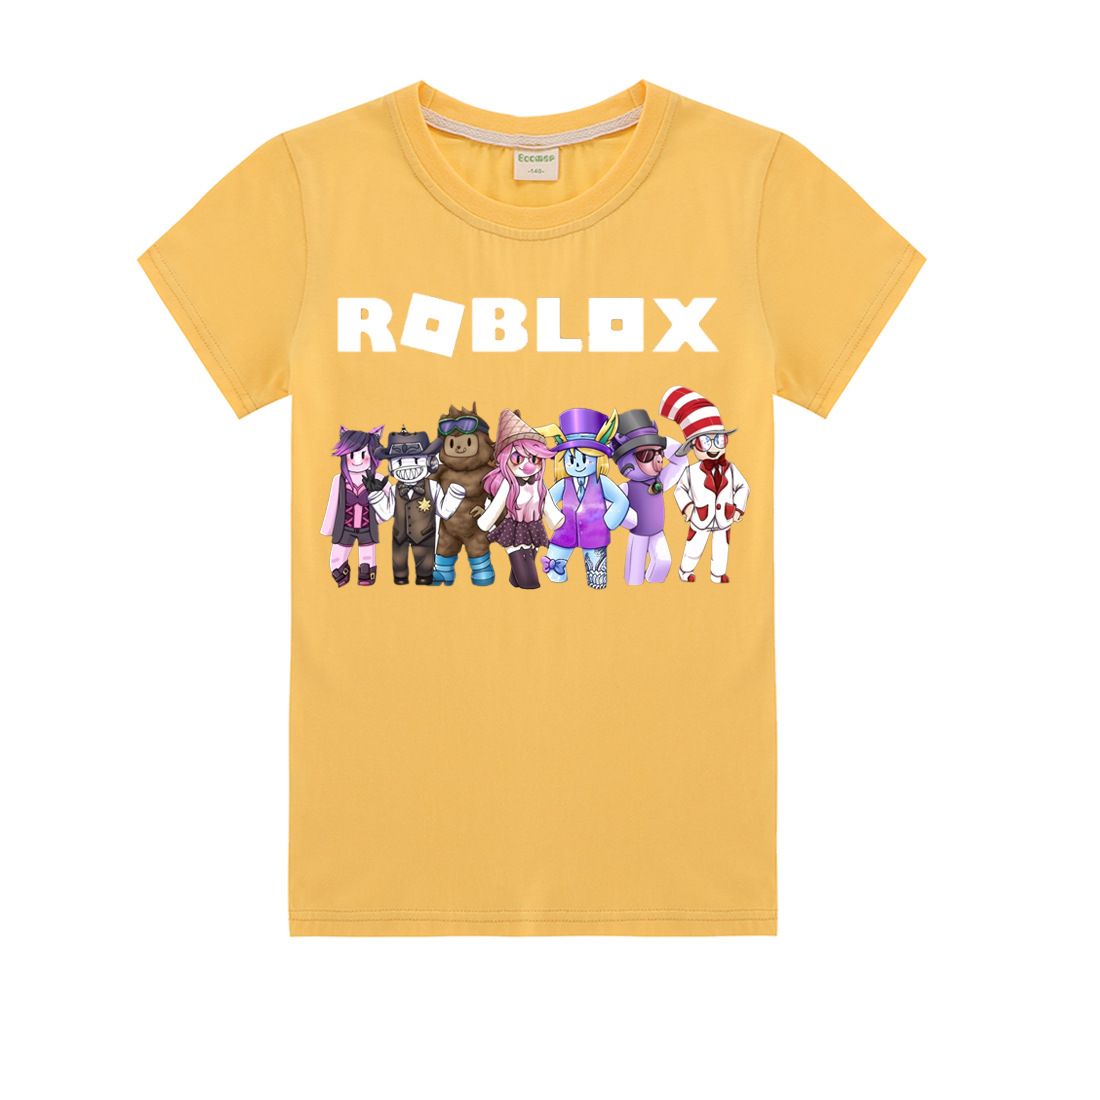 2019 2 8years 2018 kids girls clothes set roblox costume toddler girls summer clothing set boy summer set tshirtjeans shorts from fang02 1609